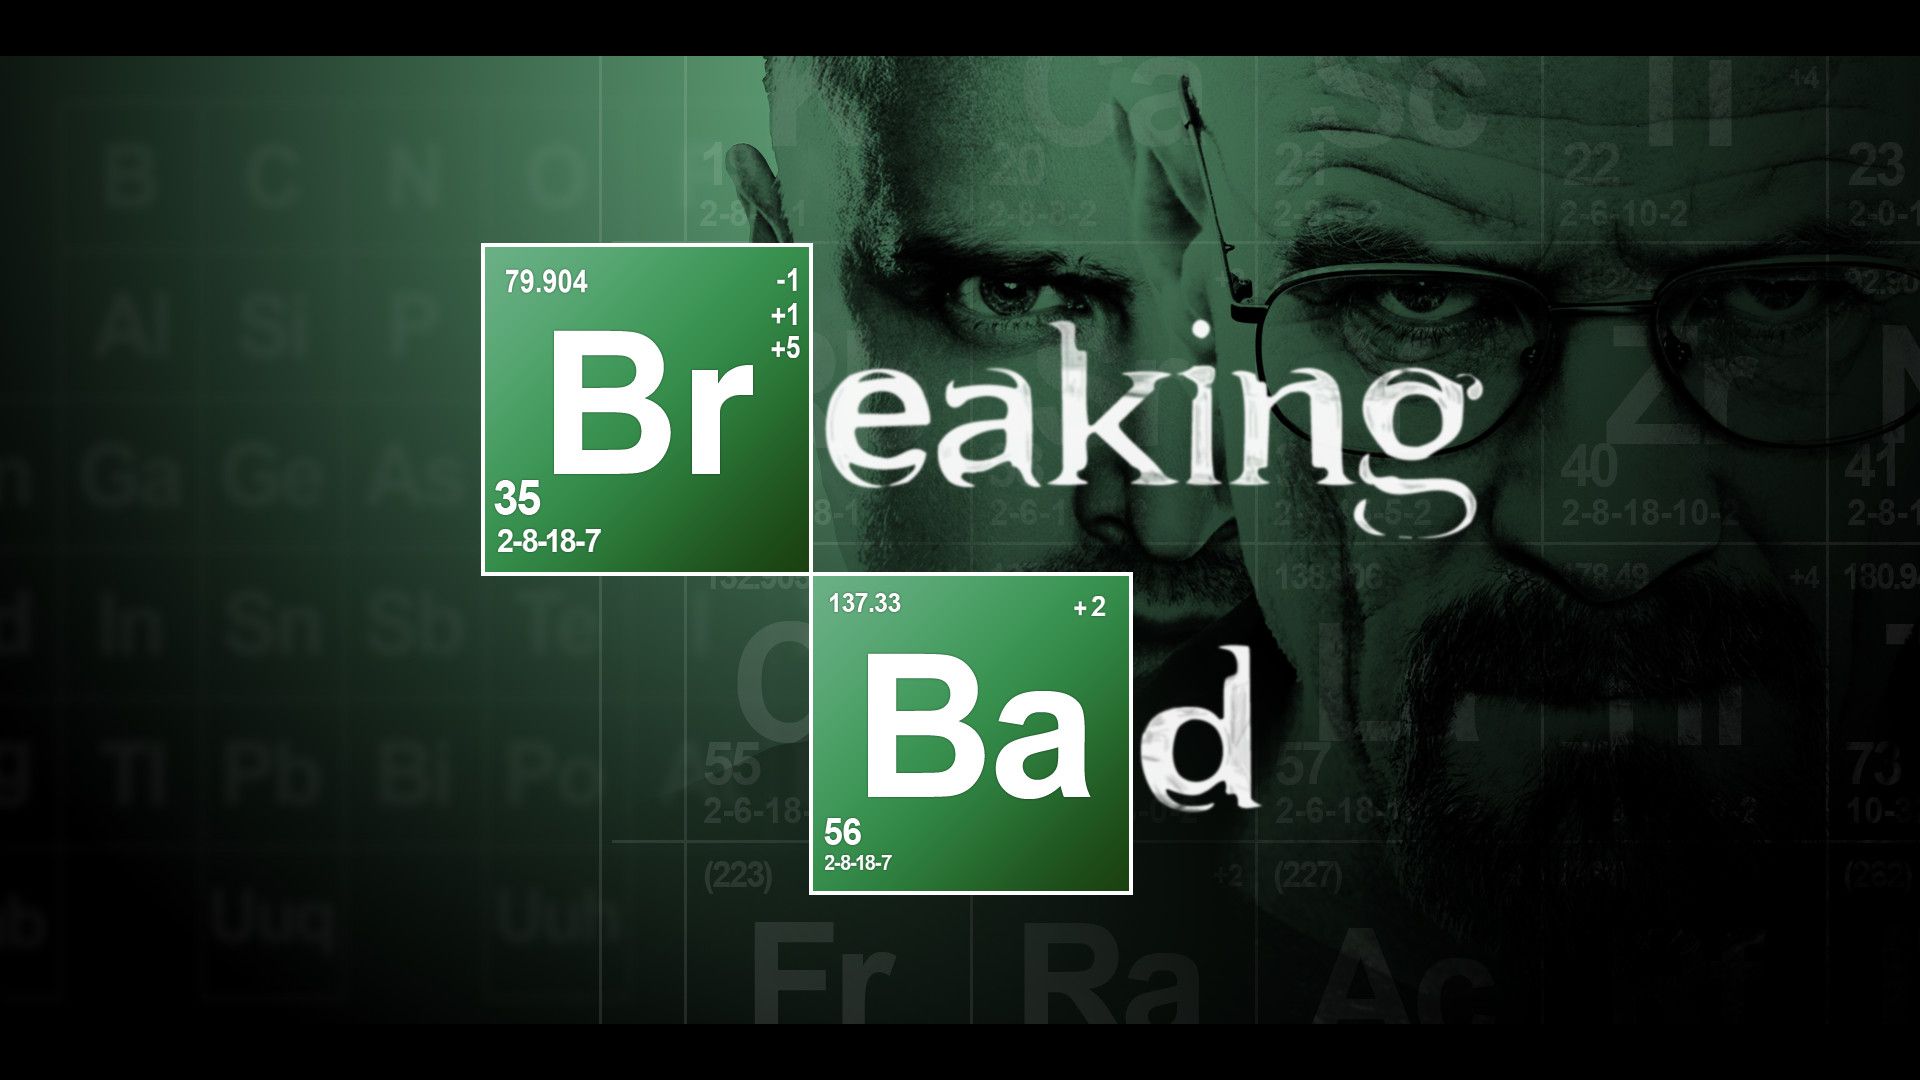 Breaking Bad. Breaking bad, Bad logos, Breaking bad gifts